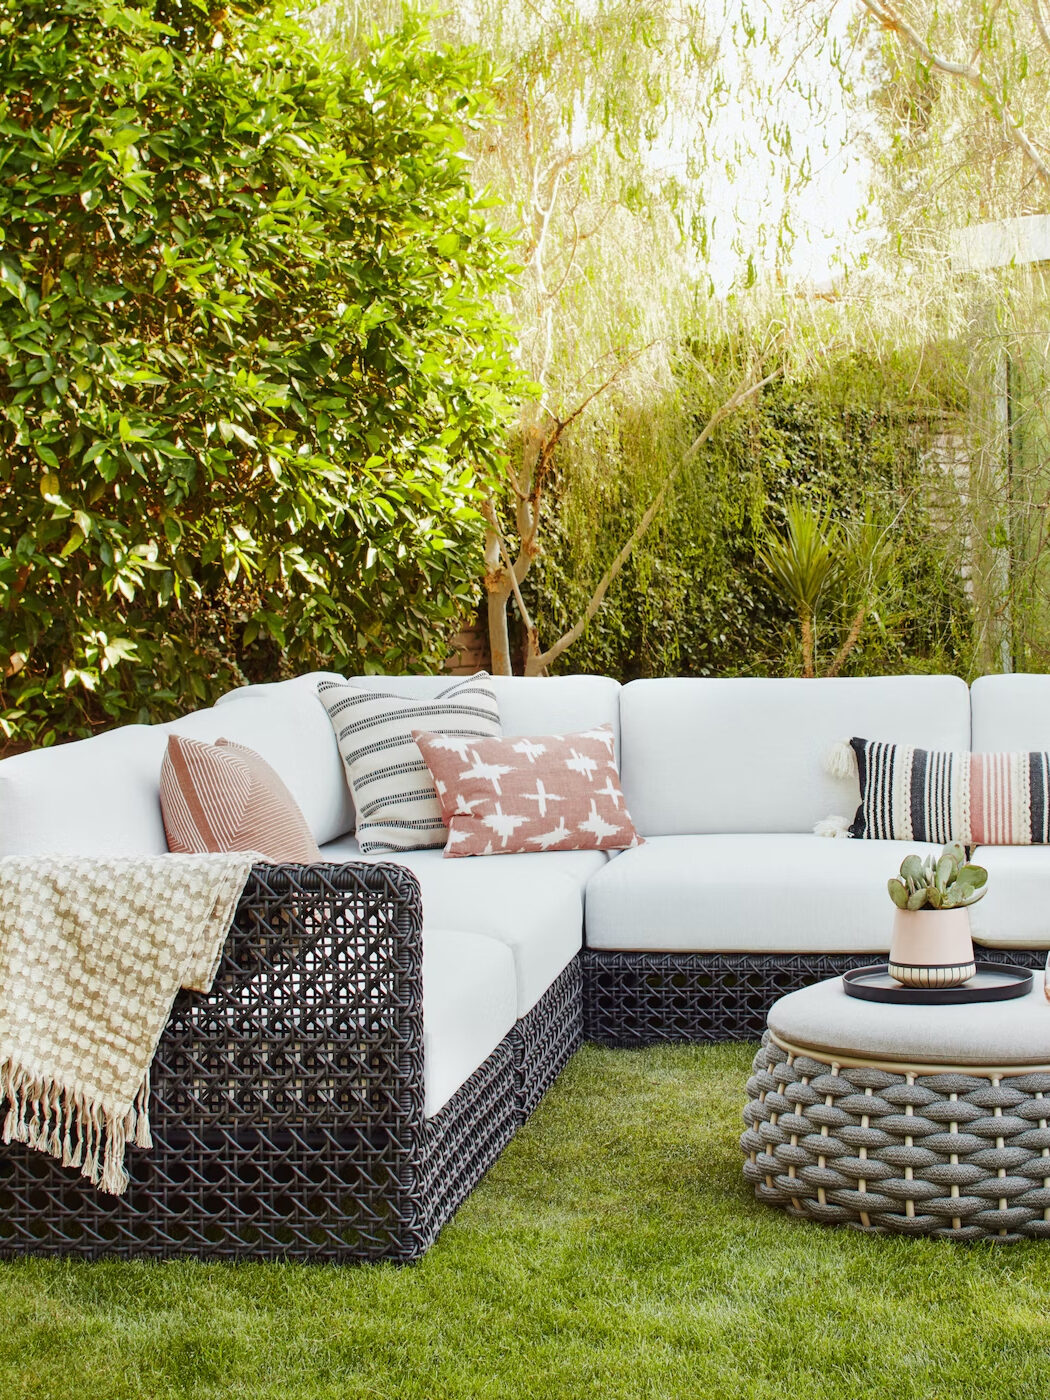 A black and white outdoor sectional with pillows and a coffee table.